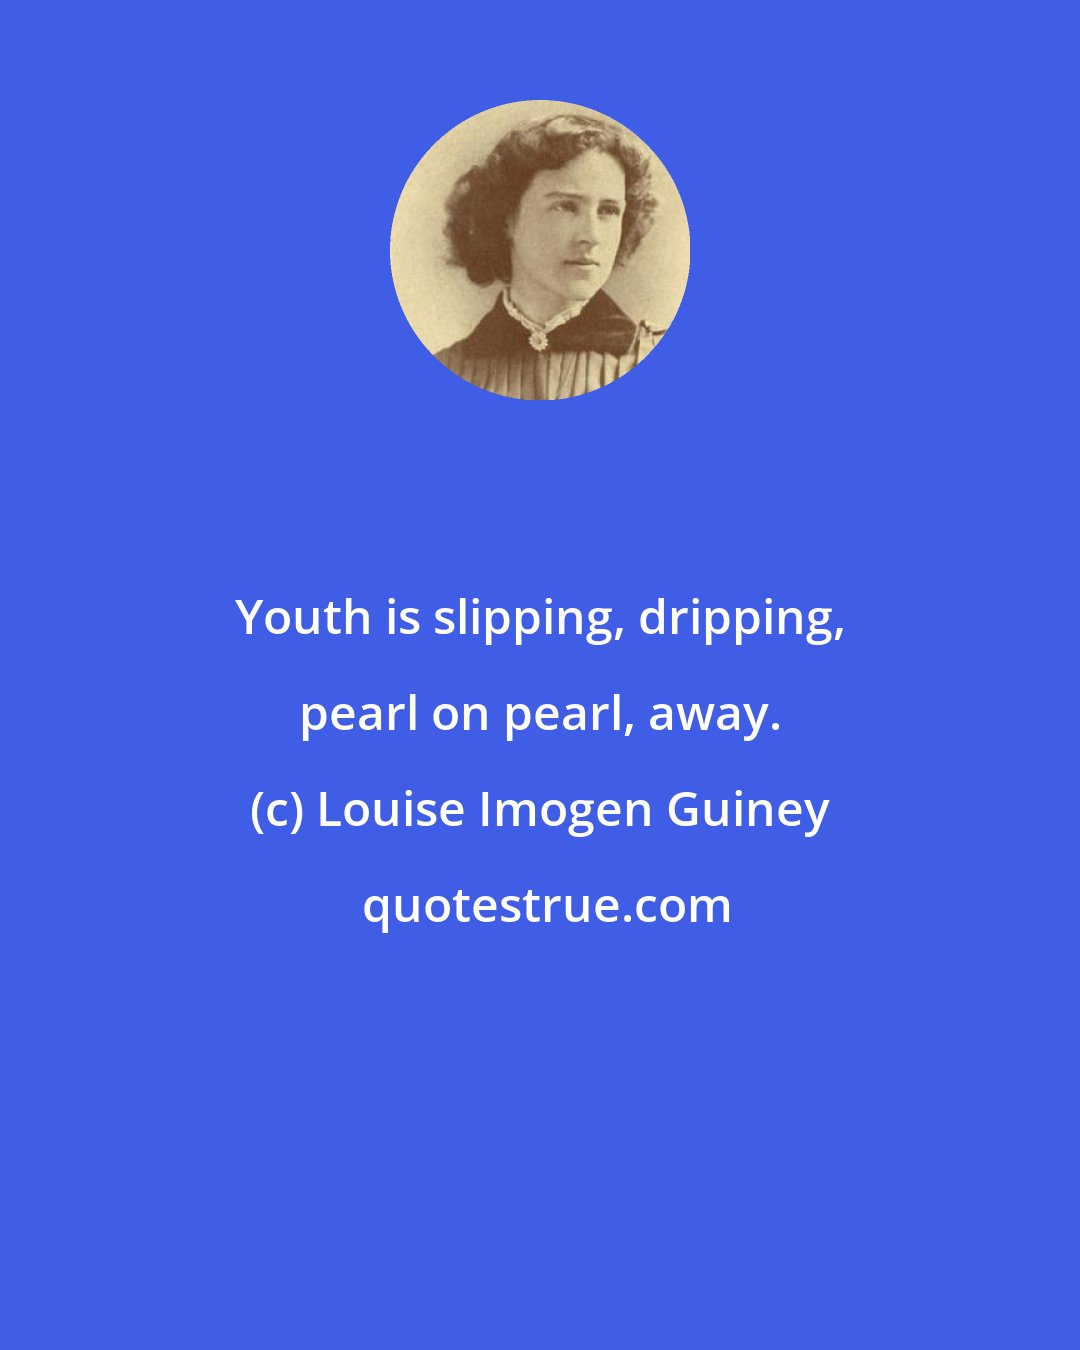 Louise Imogen Guiney: Youth is slipping, dripping, pearl on pearl, away.